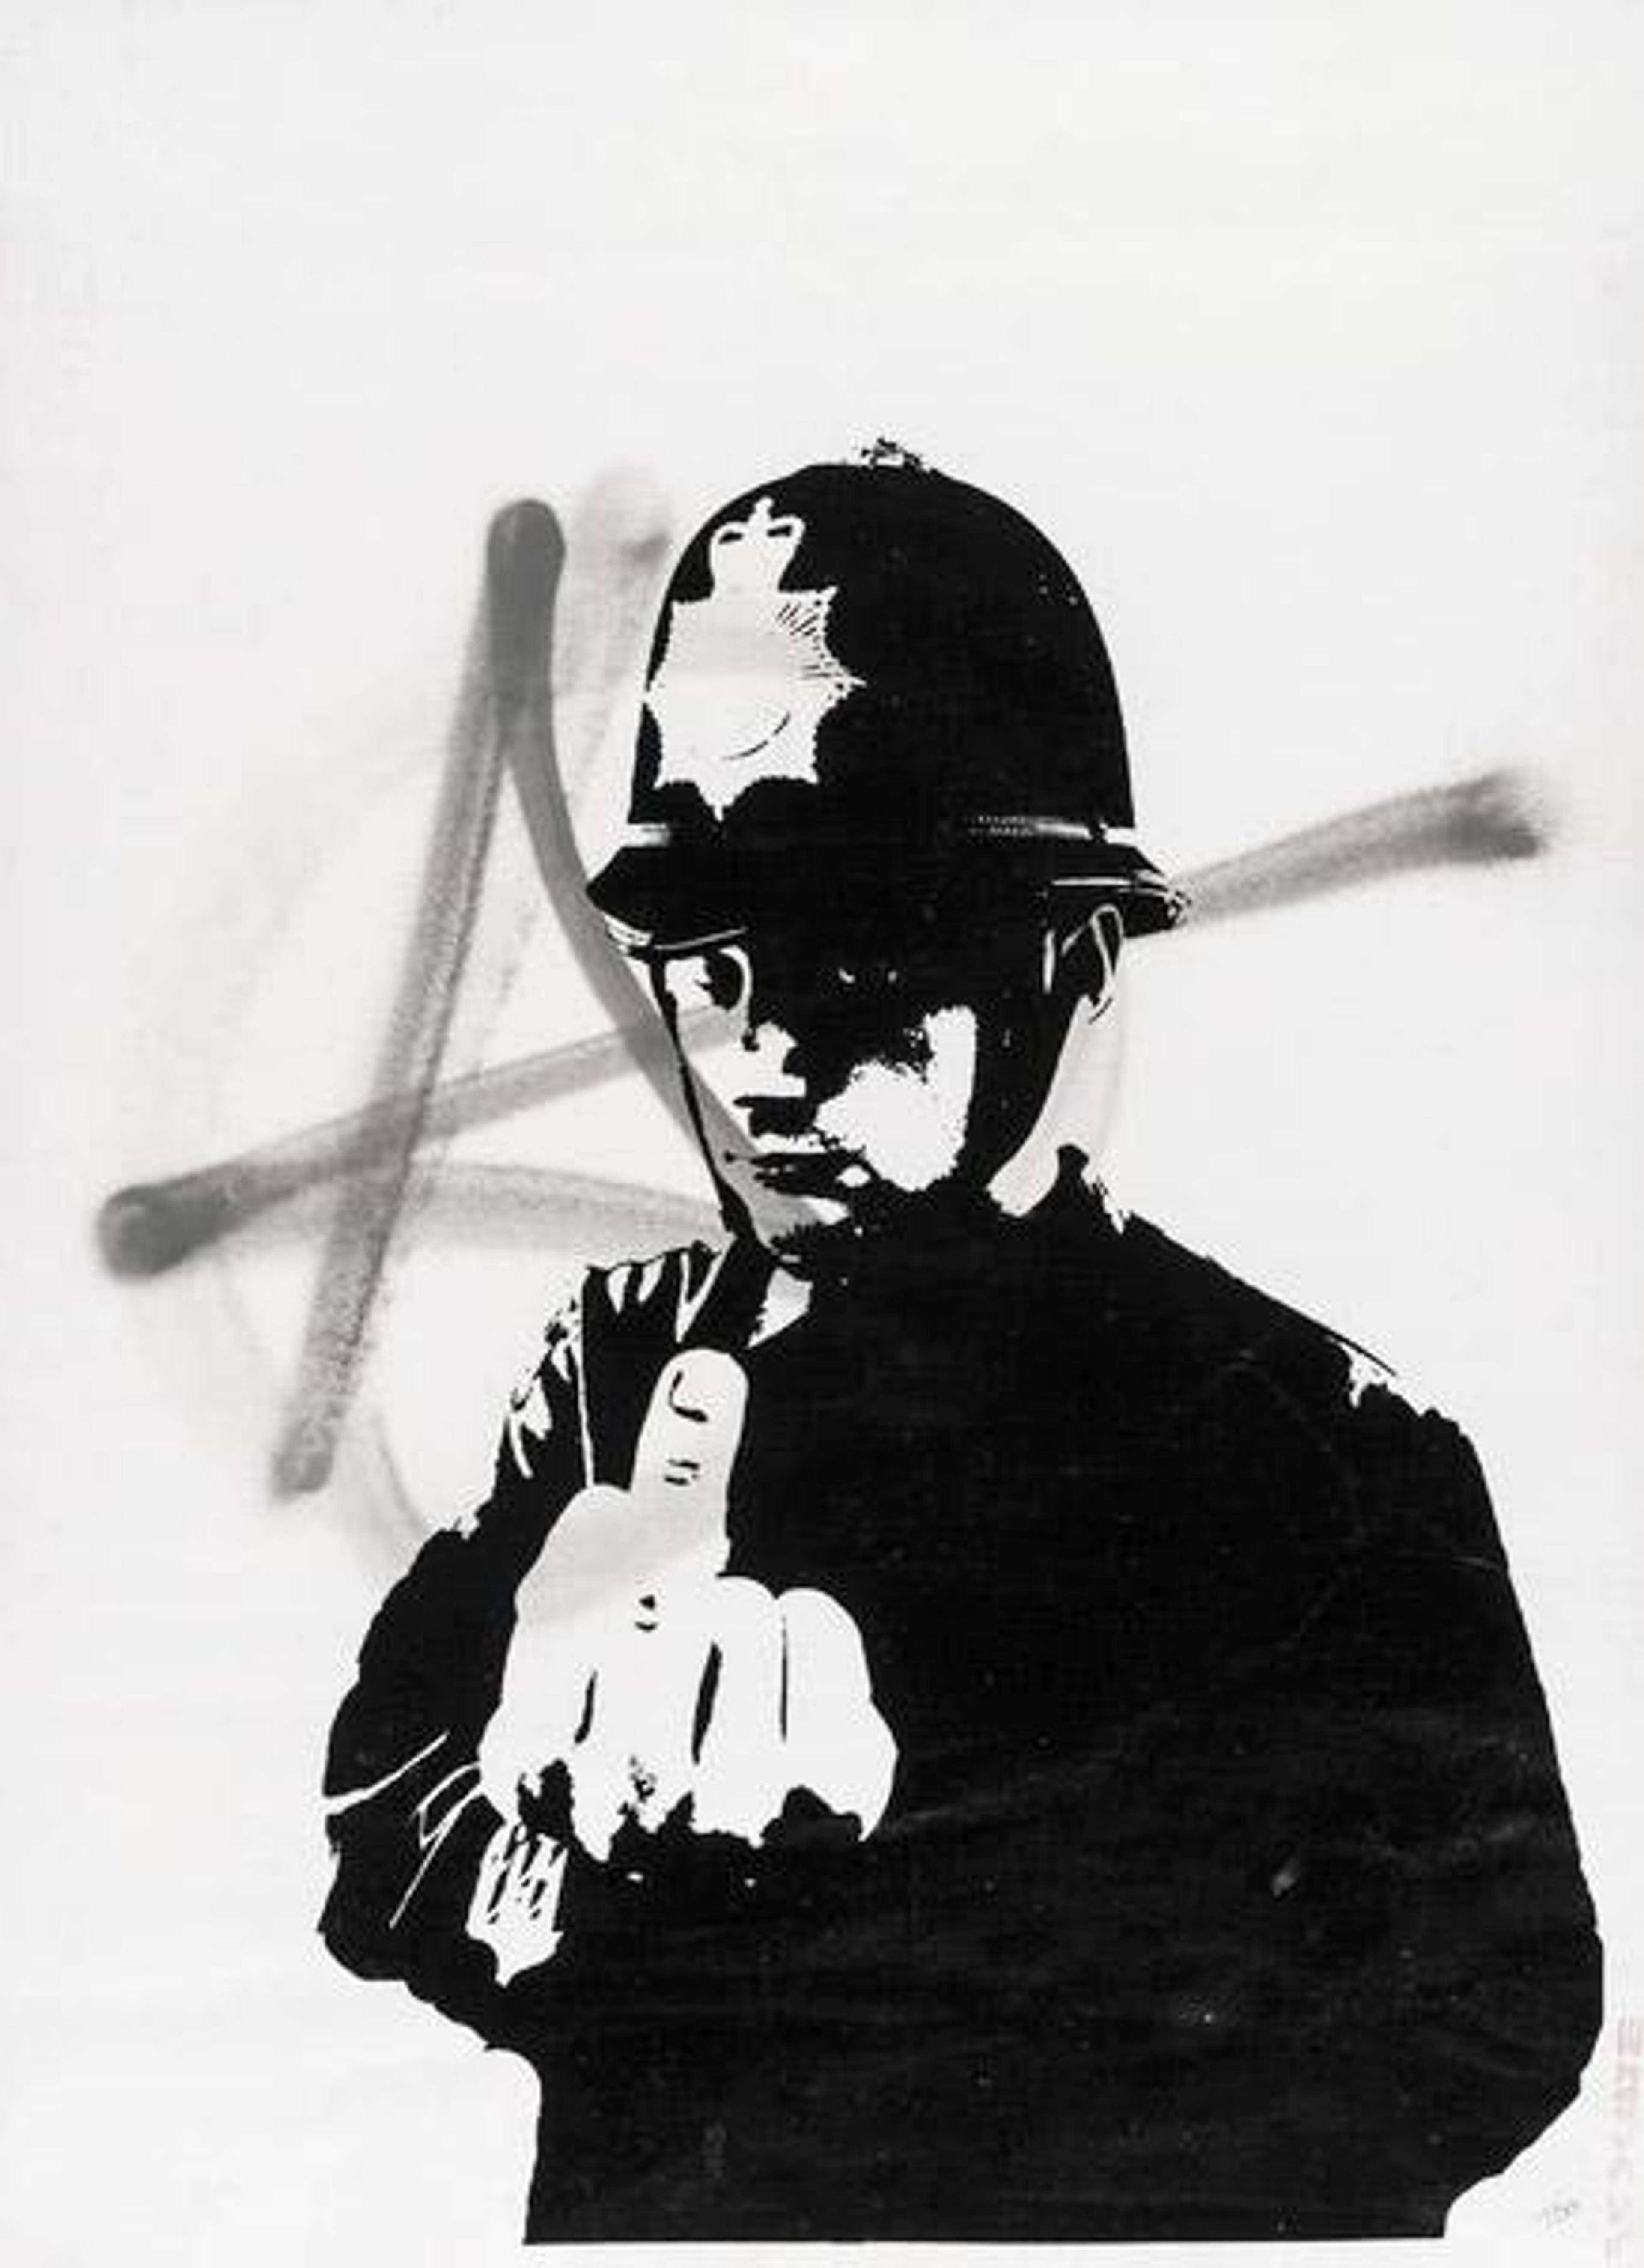 A screenprint by Banksy depicting a uniformed police officer flipping the bird at the viewer, with a spraypainted anarchy symbol in the background.